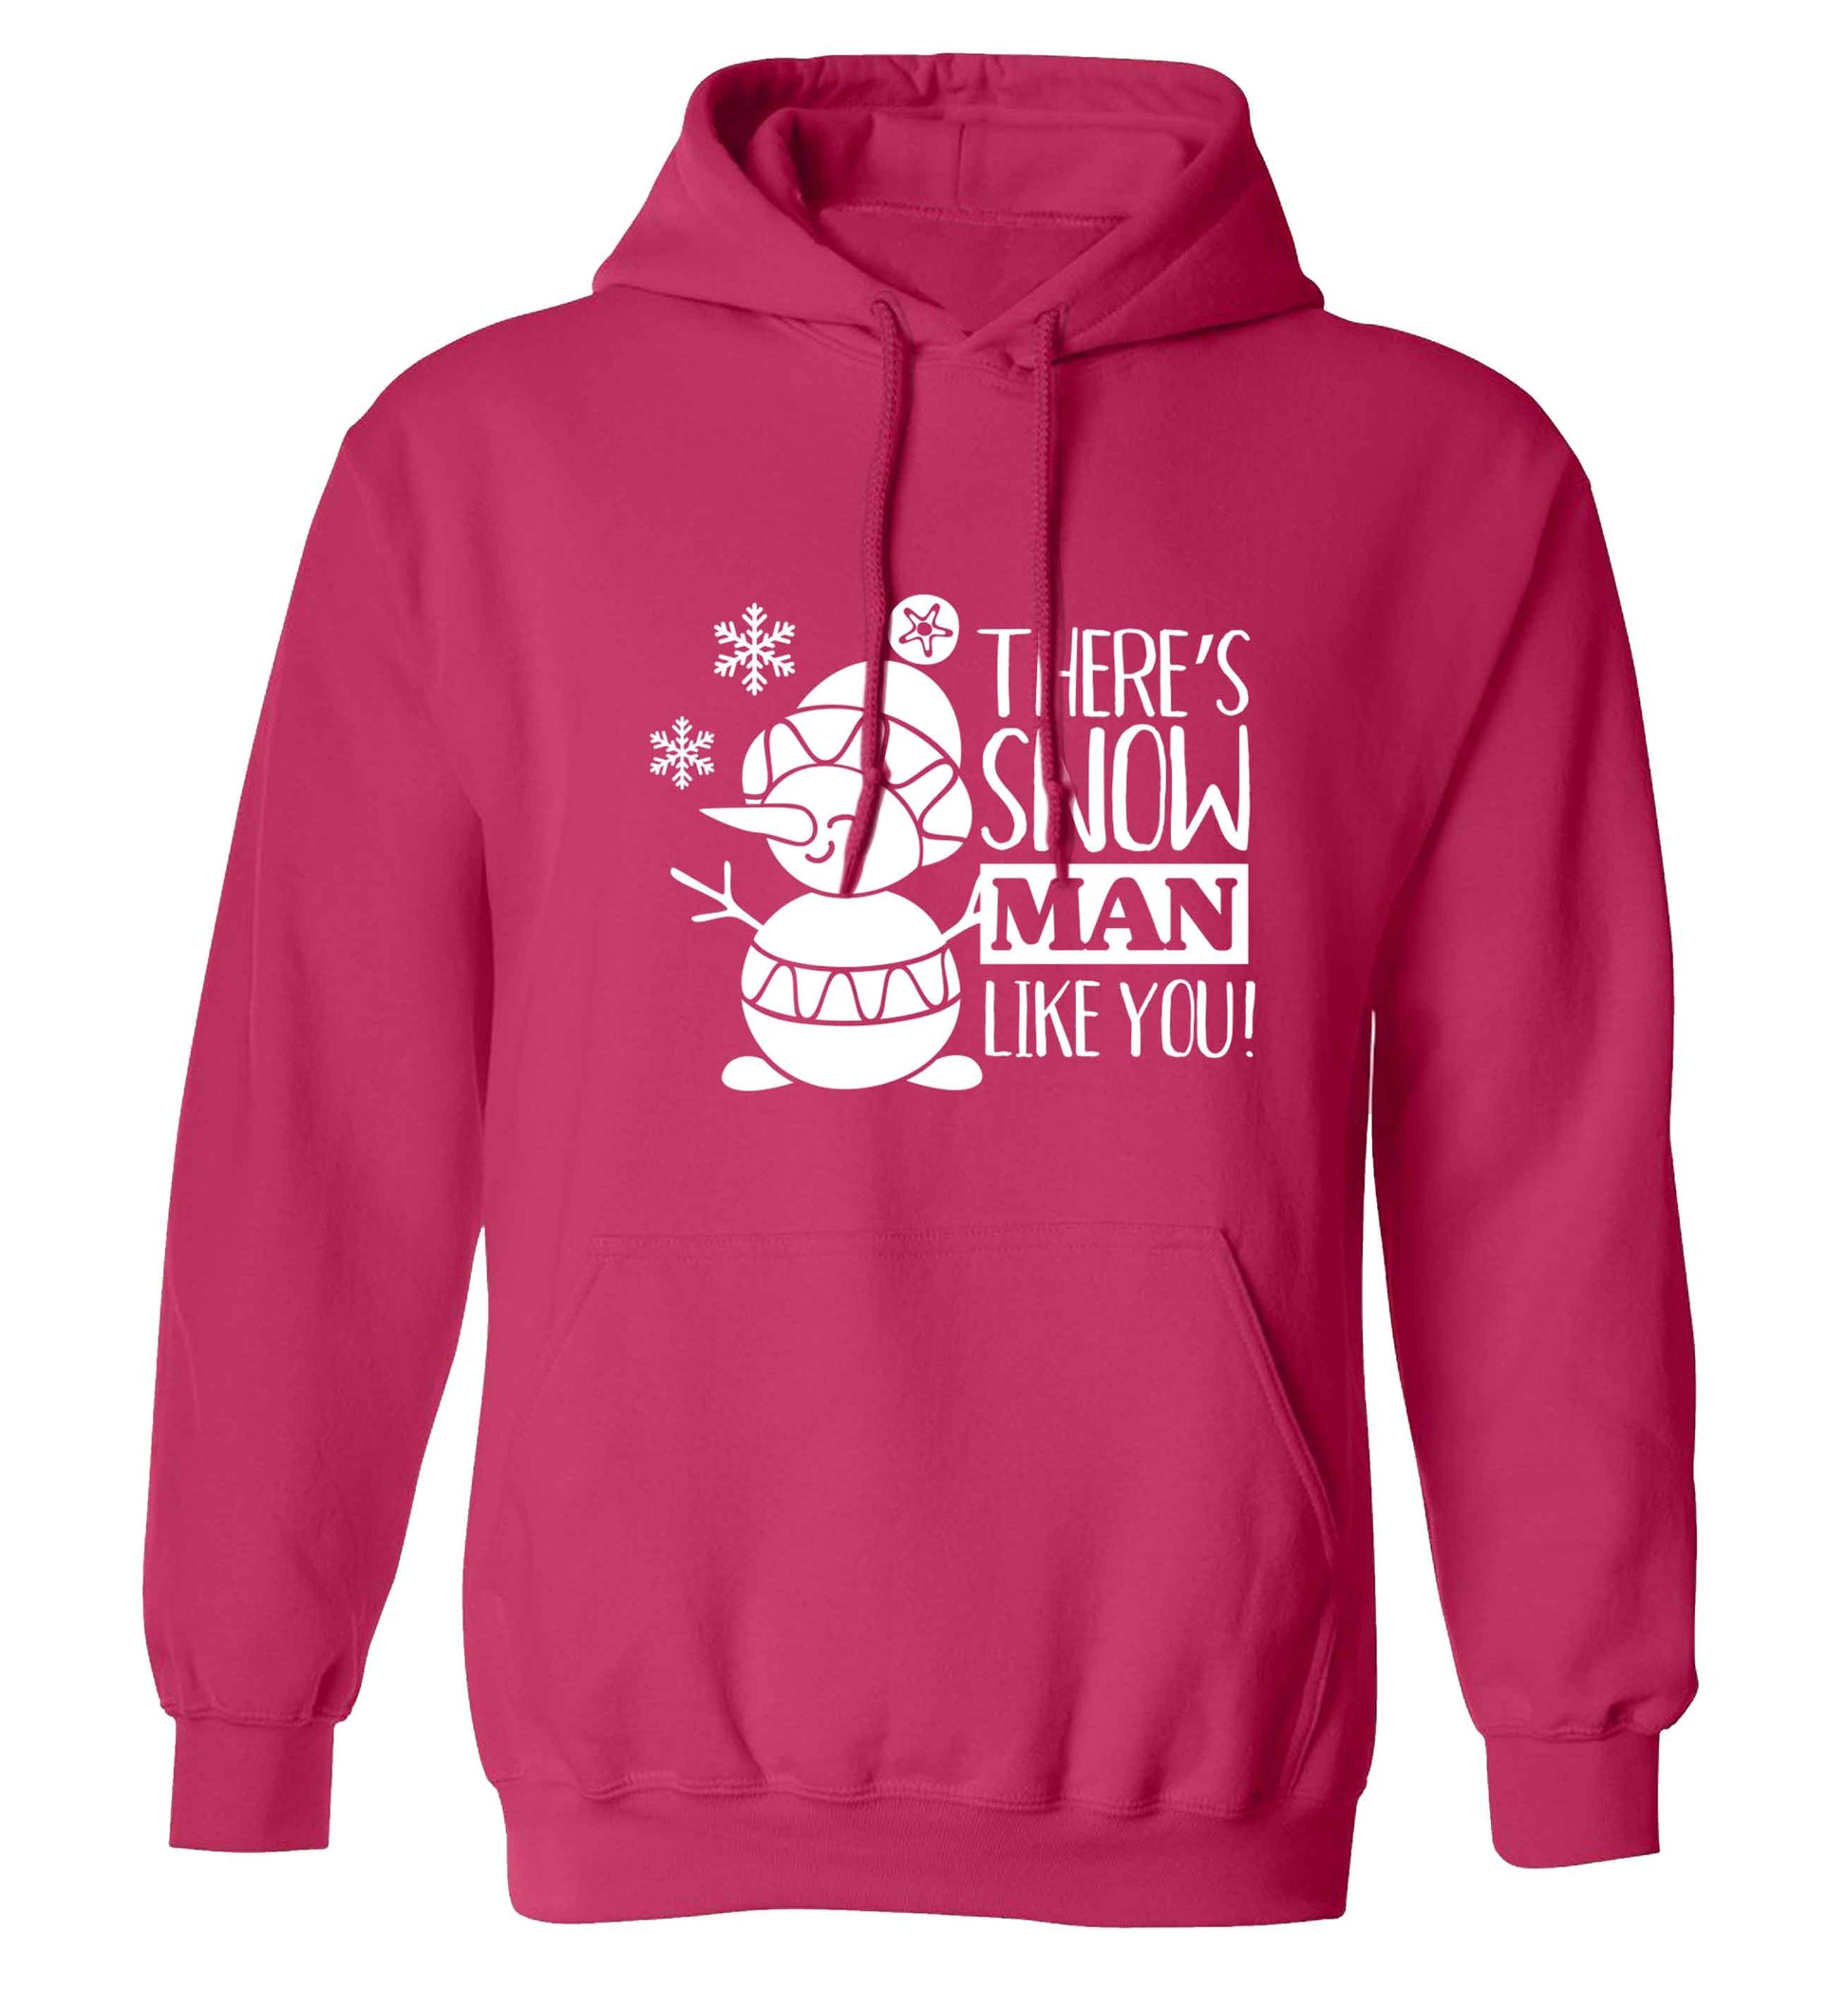 There's snow man like you adults unisex pink hoodie 2XL